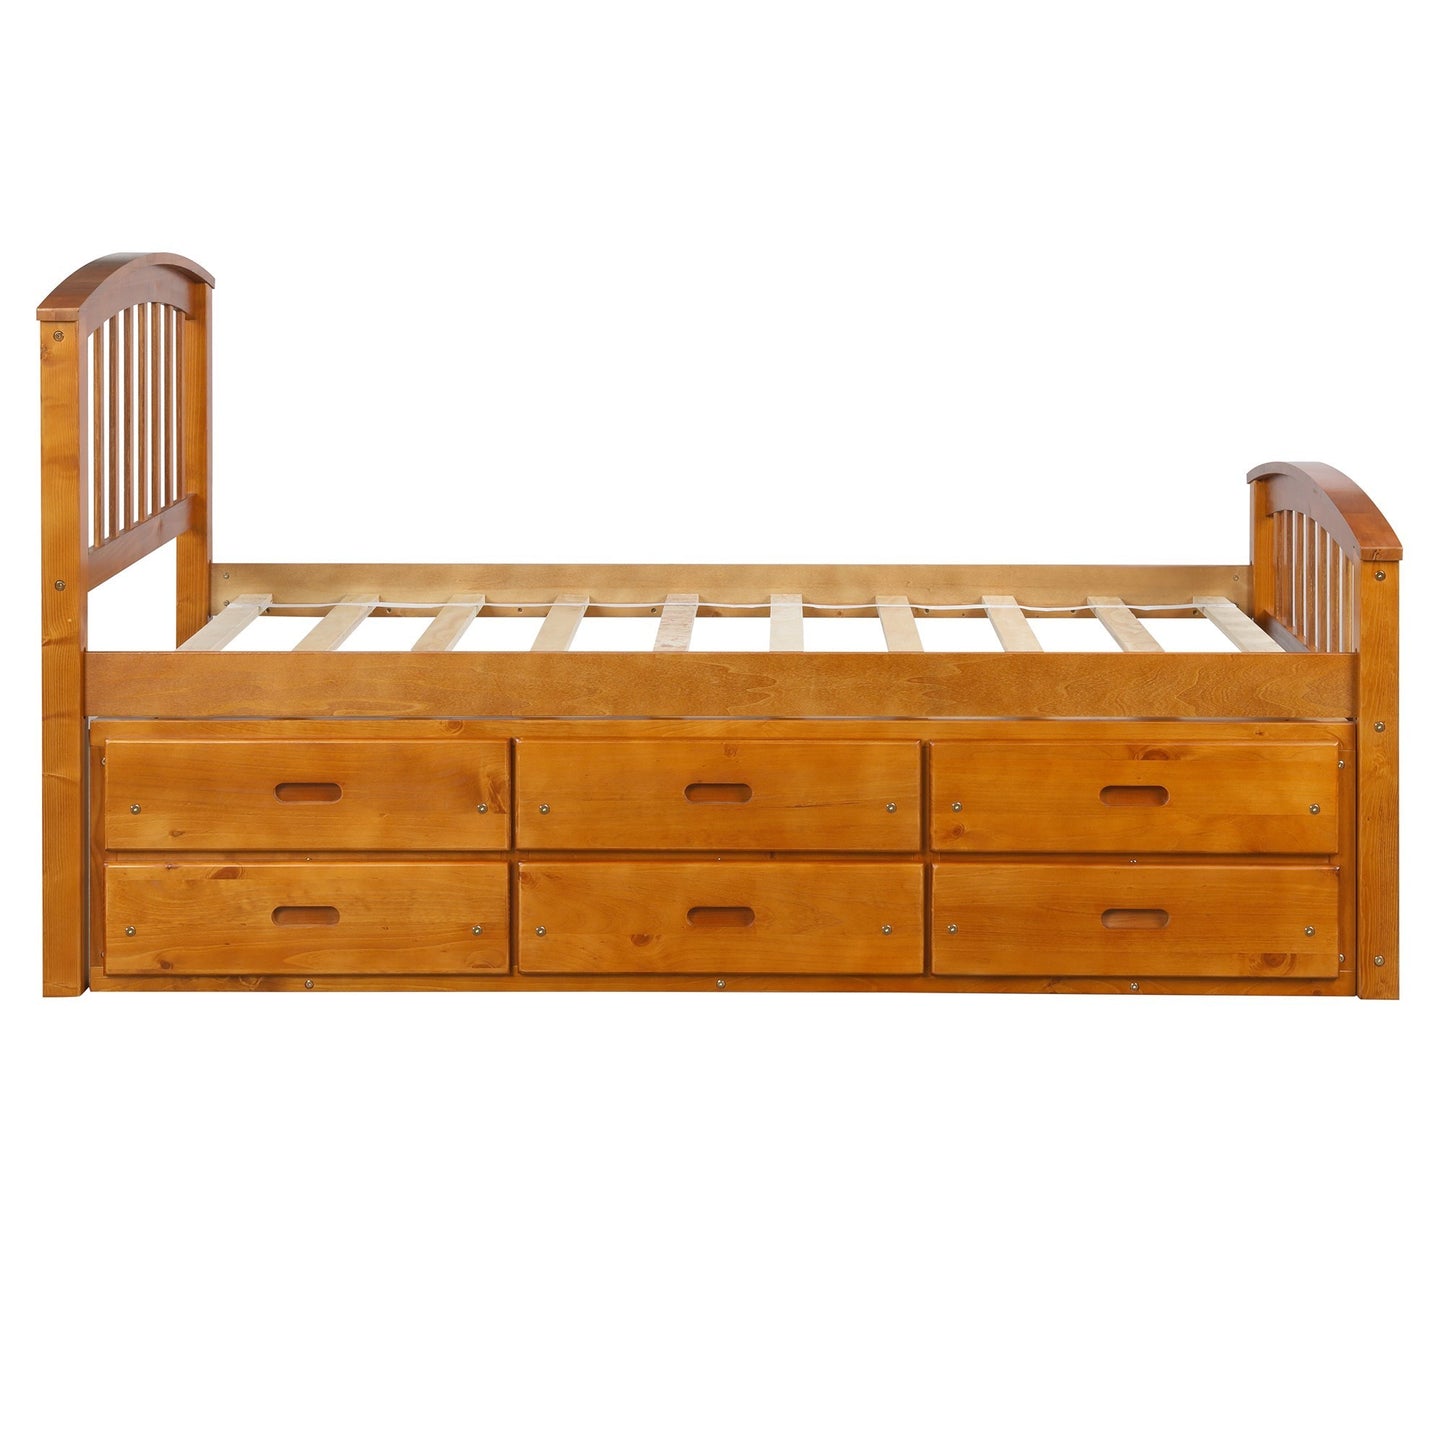 ORISFUR. Twin Size Platform Storage Bed Solid Wood Bed with 6 Drawers